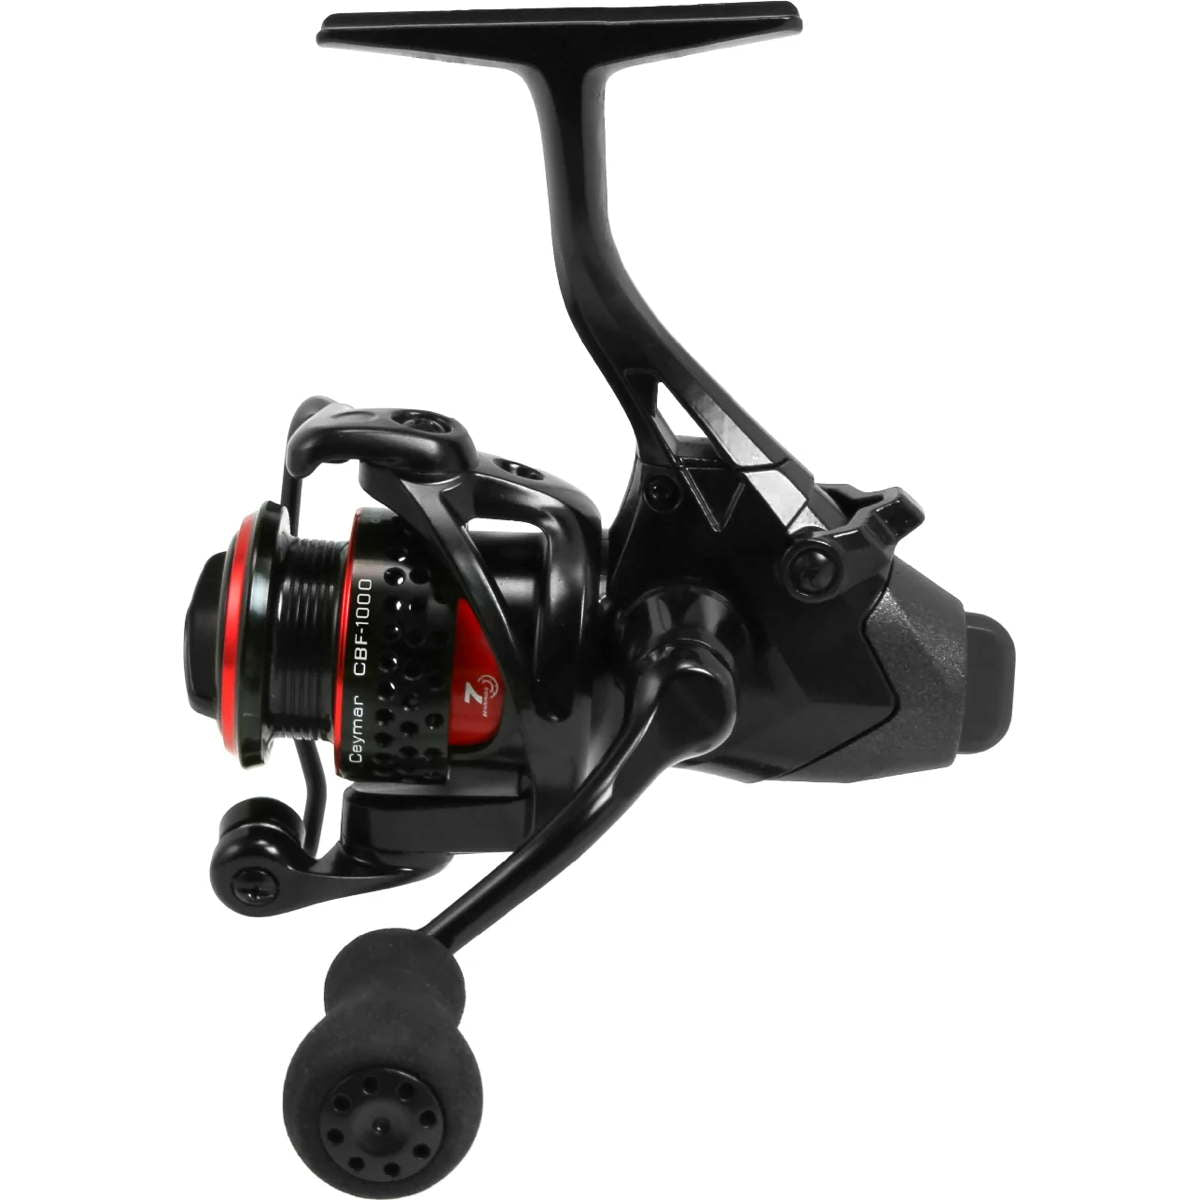 Photo of Okuma Ceymar Micro Baitfeeder Spinning Reel for sale at United Tackle Shops.